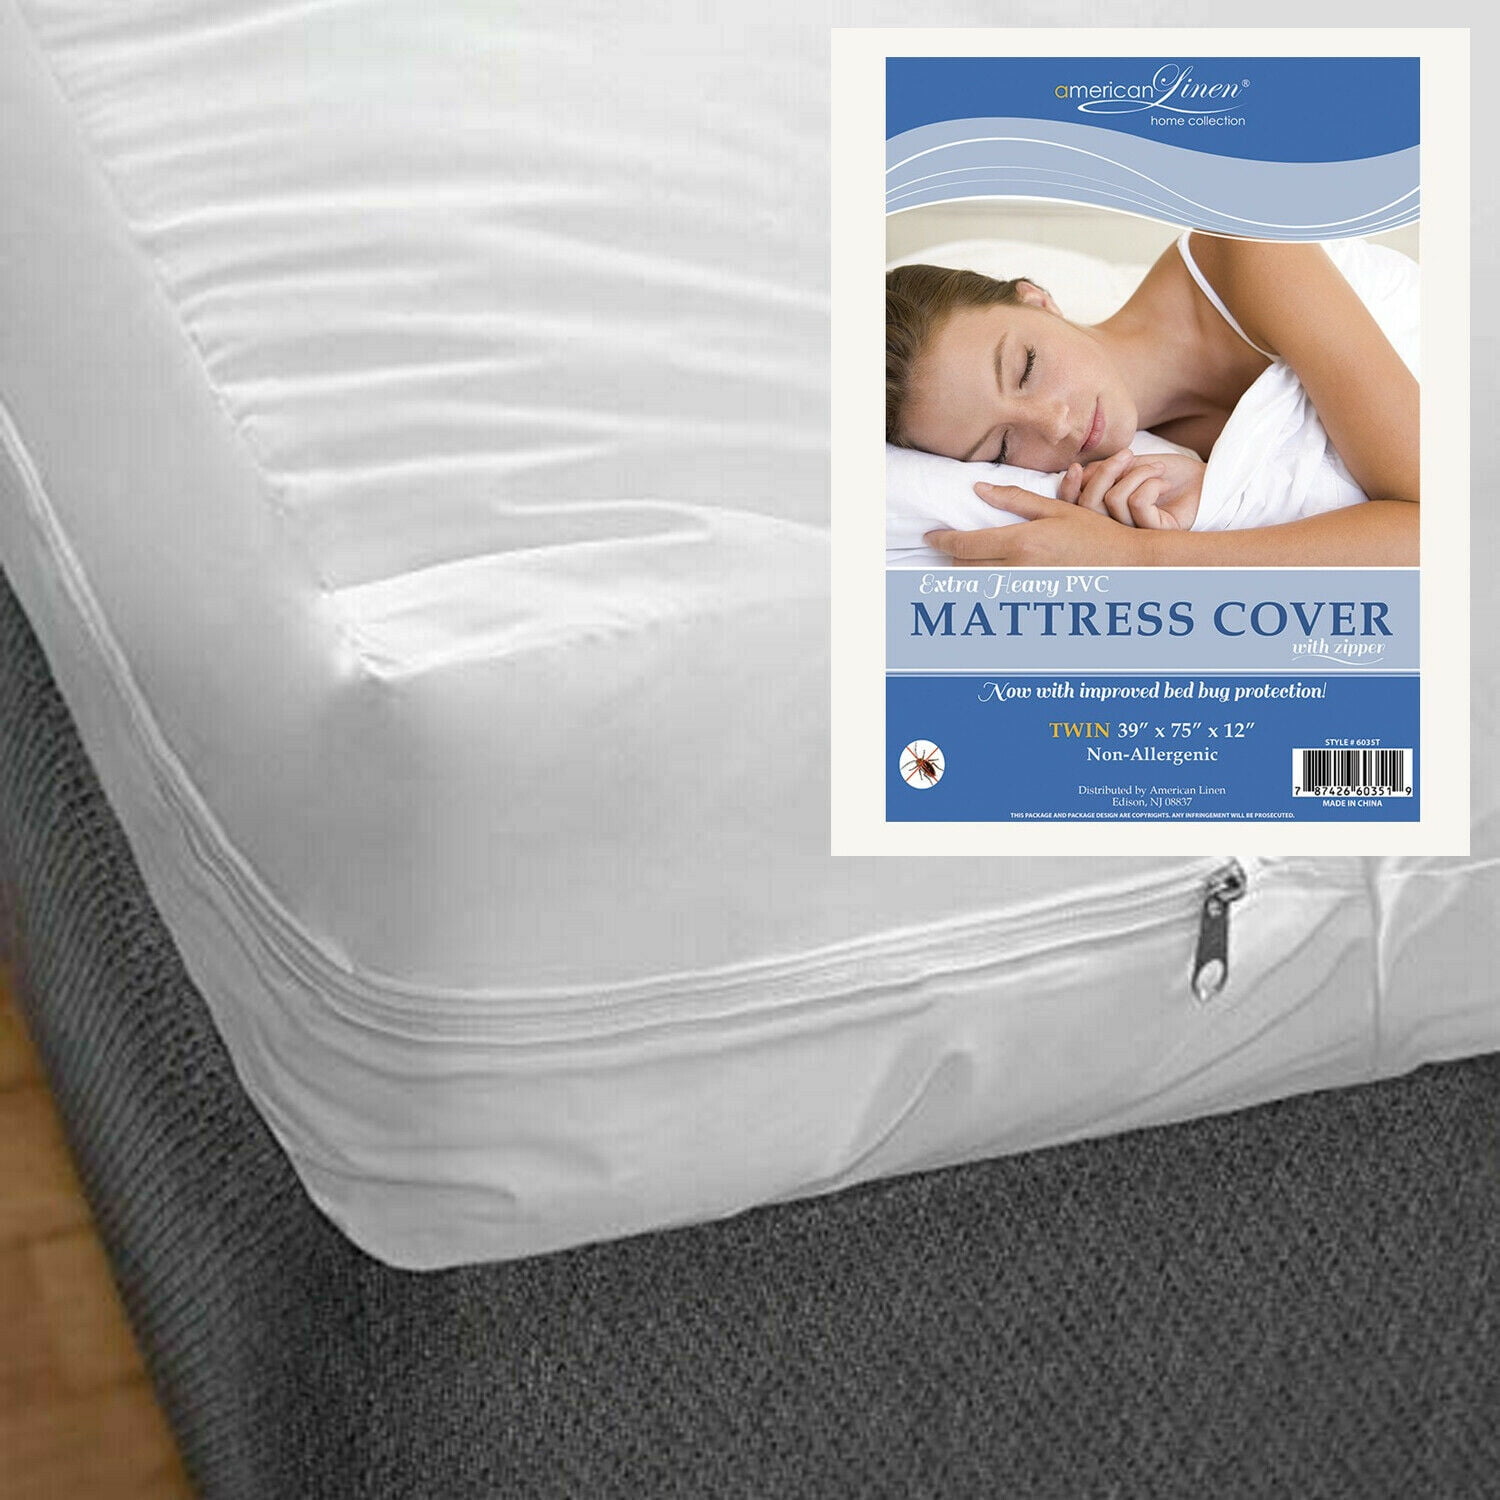 Allergenic Bed Bug Protector, Twin Size Bed Bug Mattress Cover